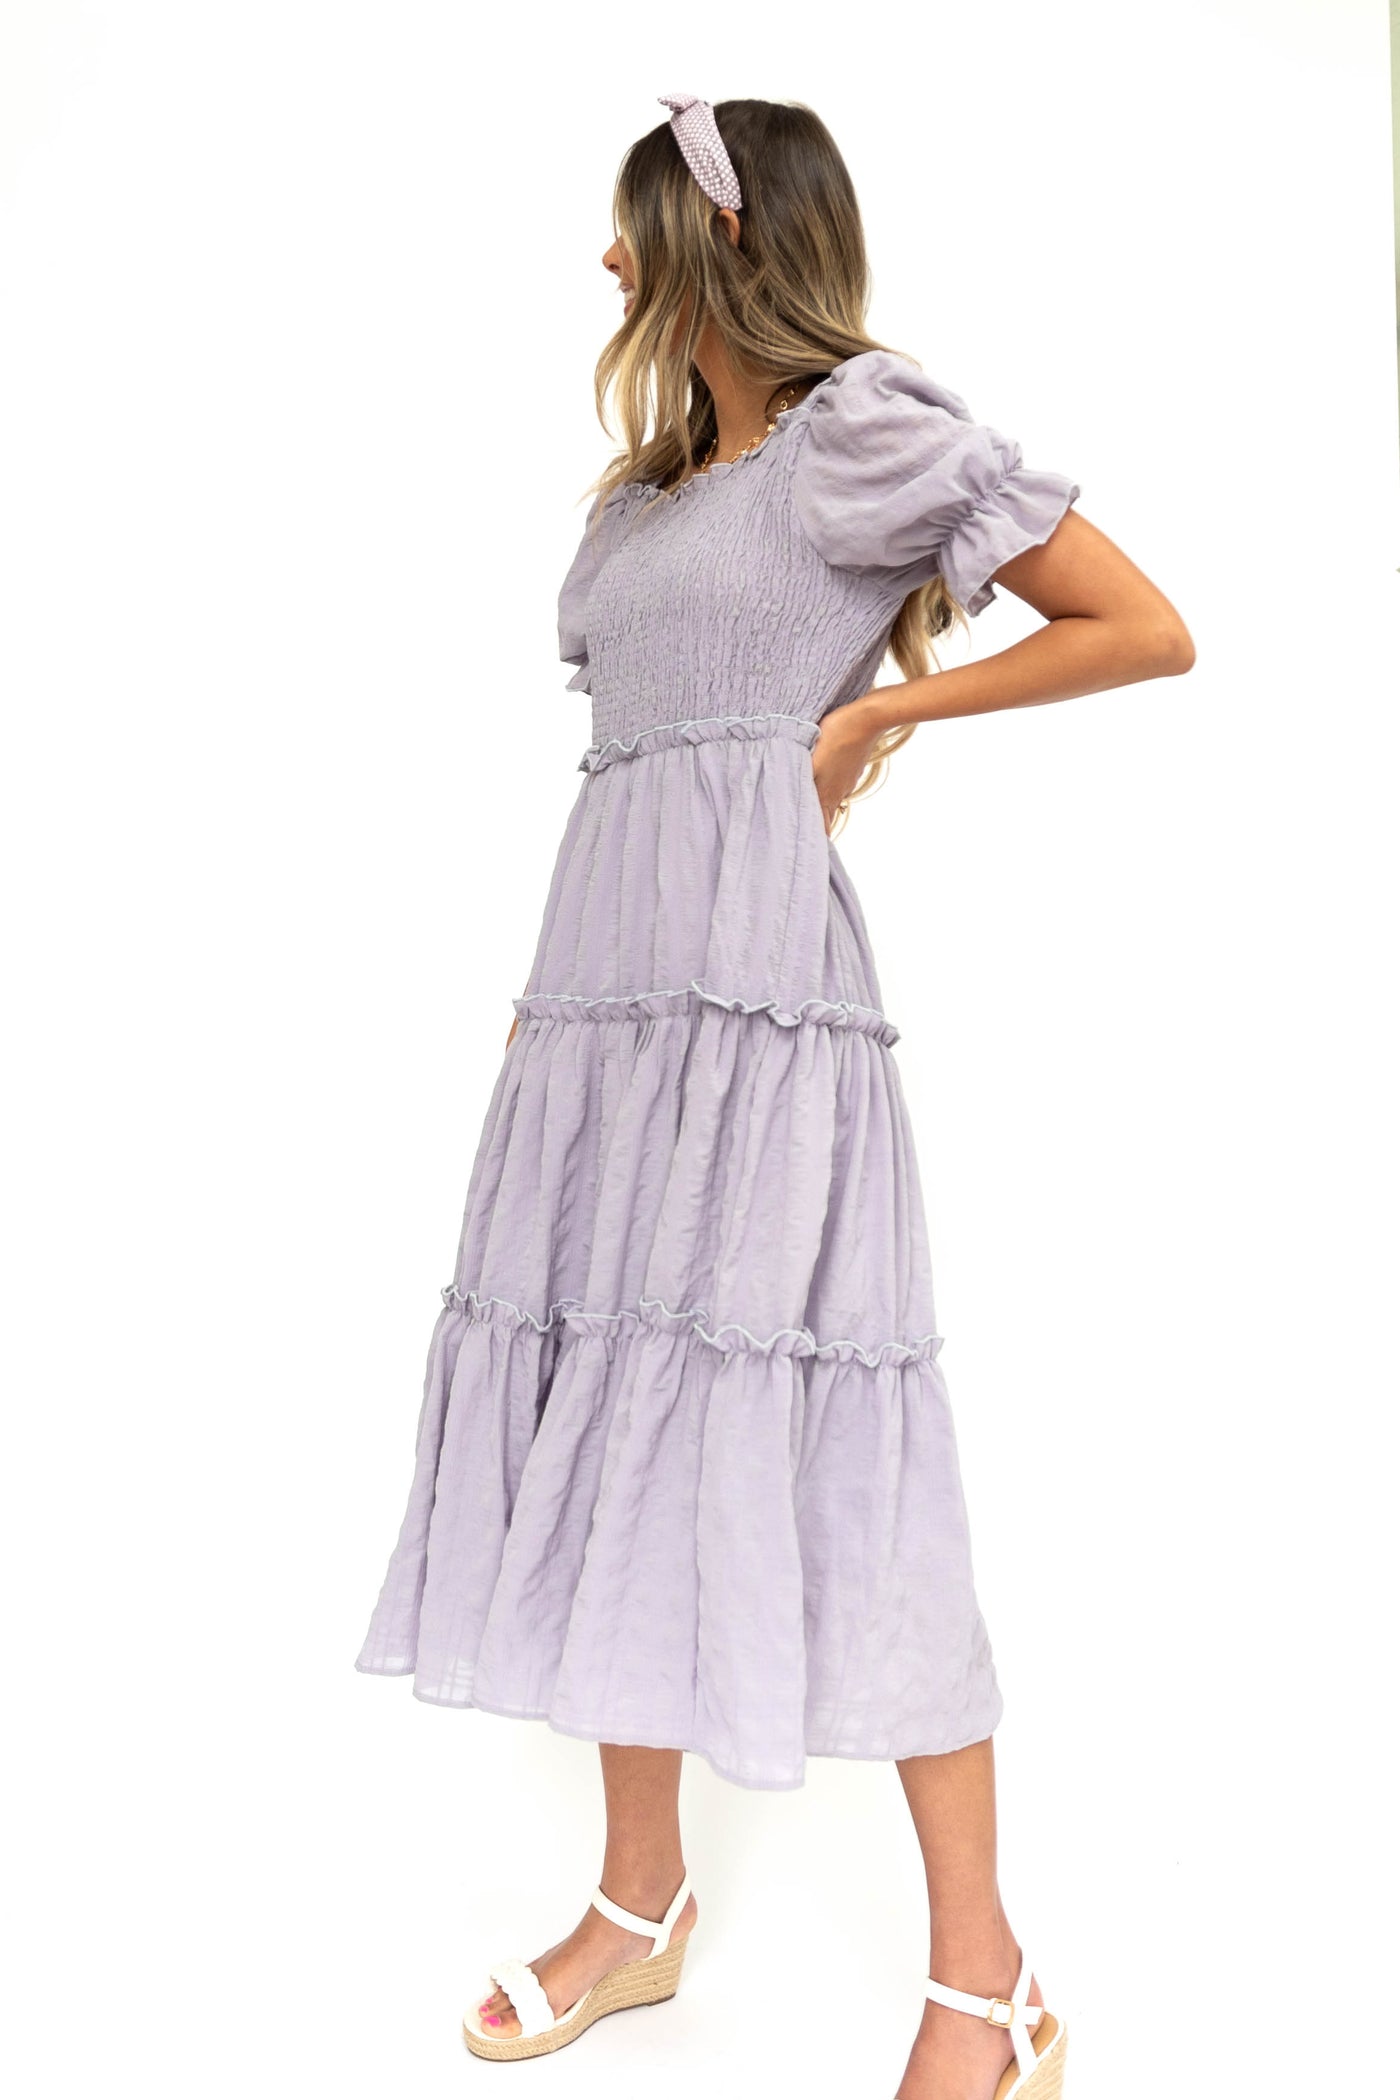 Short sleeve lavender dress with smocked bodice and tiered skirt